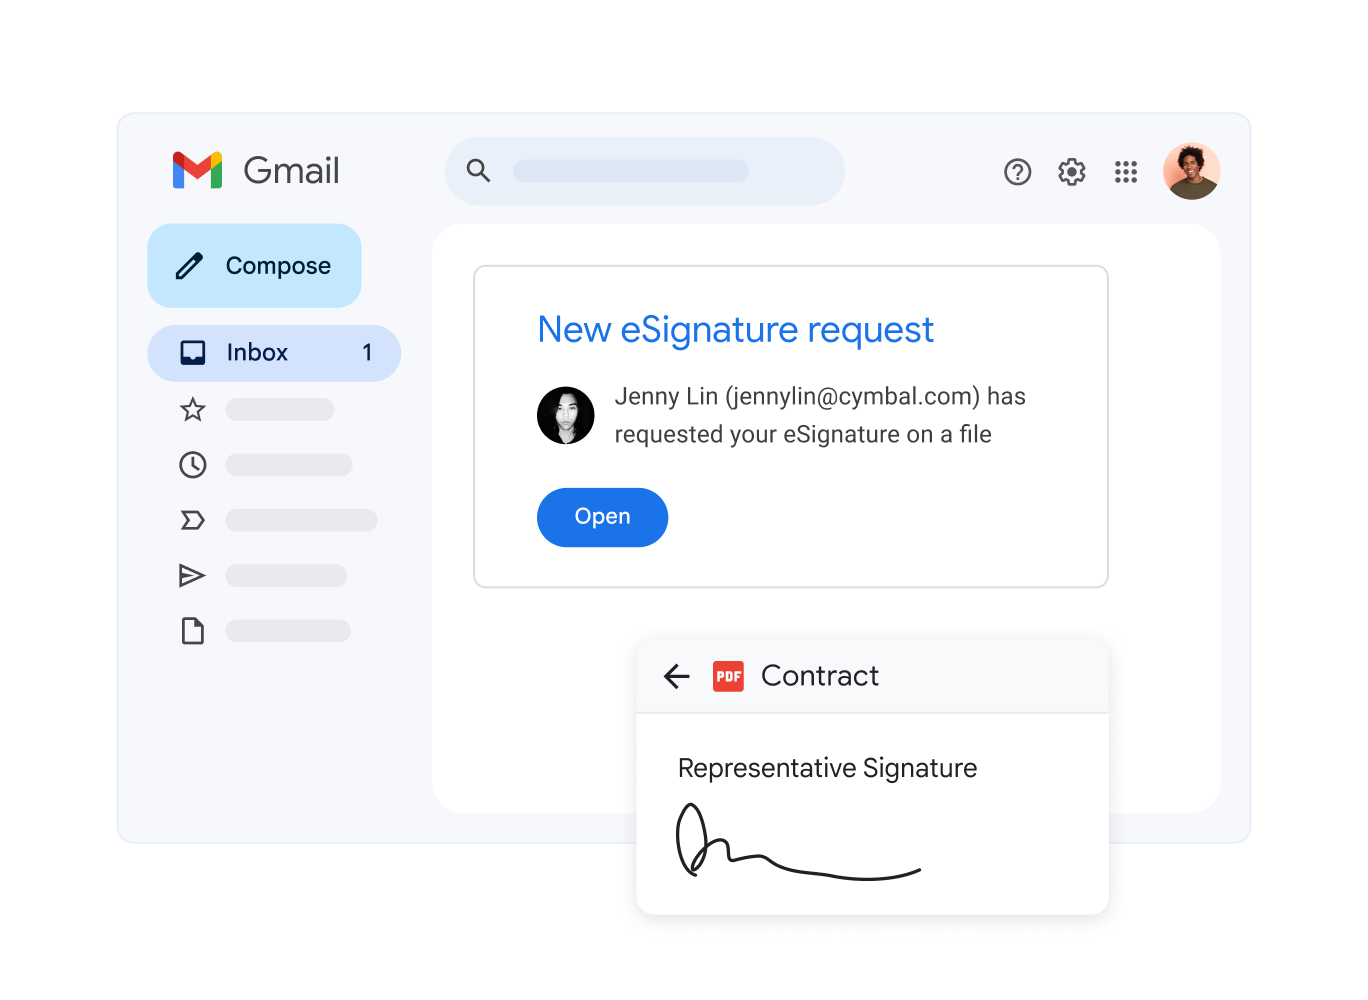 Stylised UI shows a pop-up for an eSignature that's been requested.
